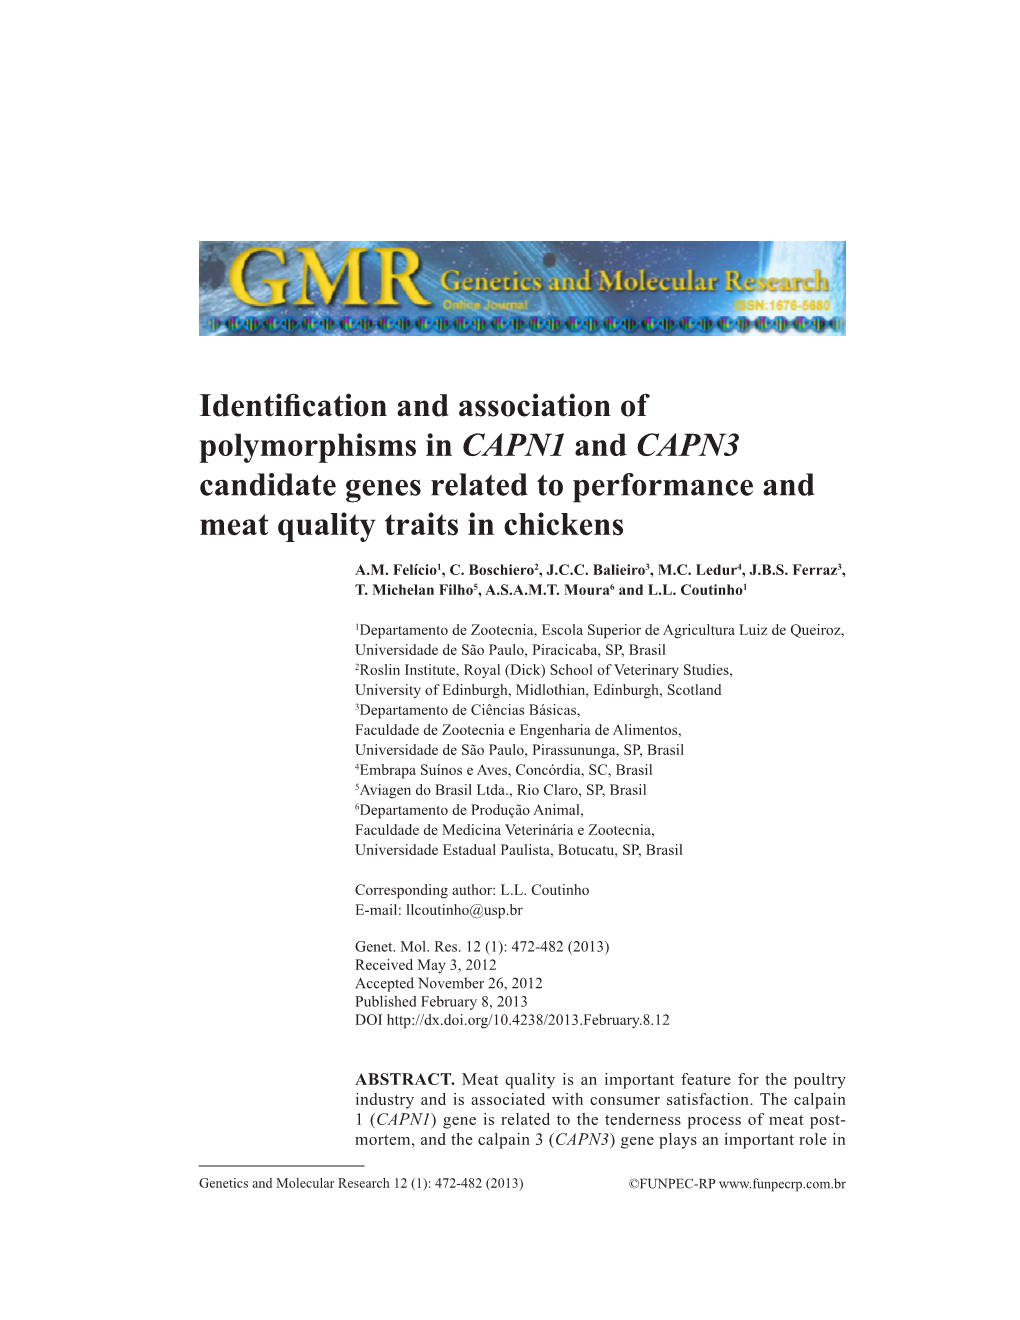 Identification and Association of Polymorphisms in CAPN1 and CAPN3 Candidate Genes Related to Performance and Meat Quality Traits in Chickens